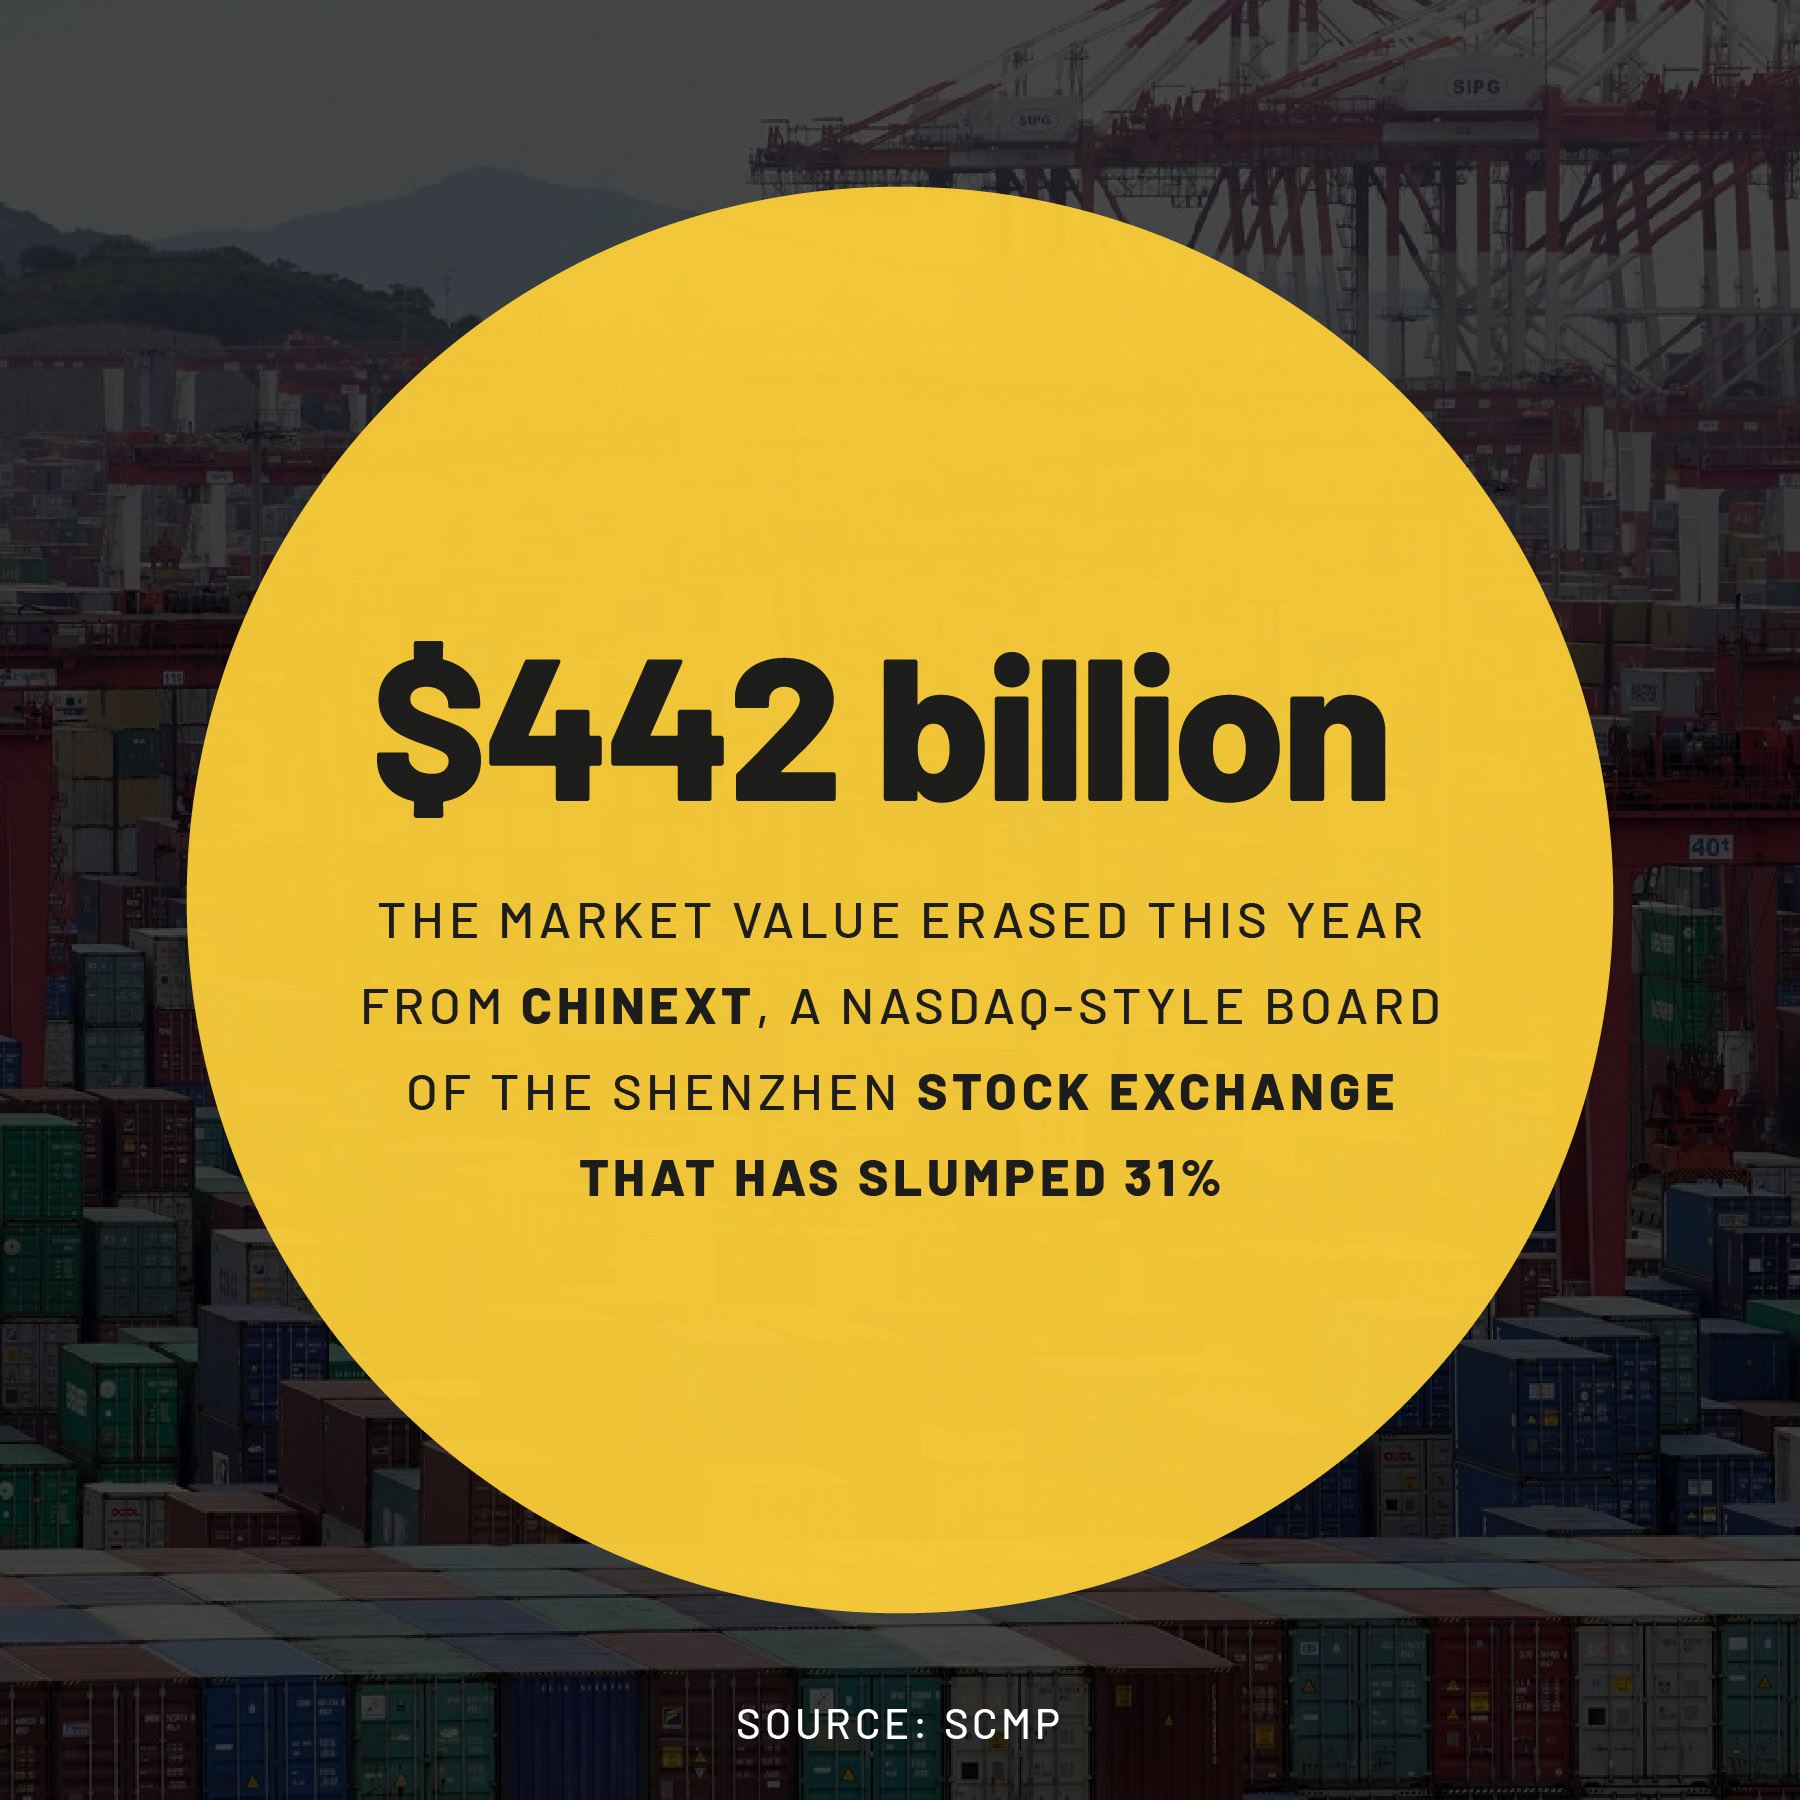 Infographic on the market value erased this year from ChiNext